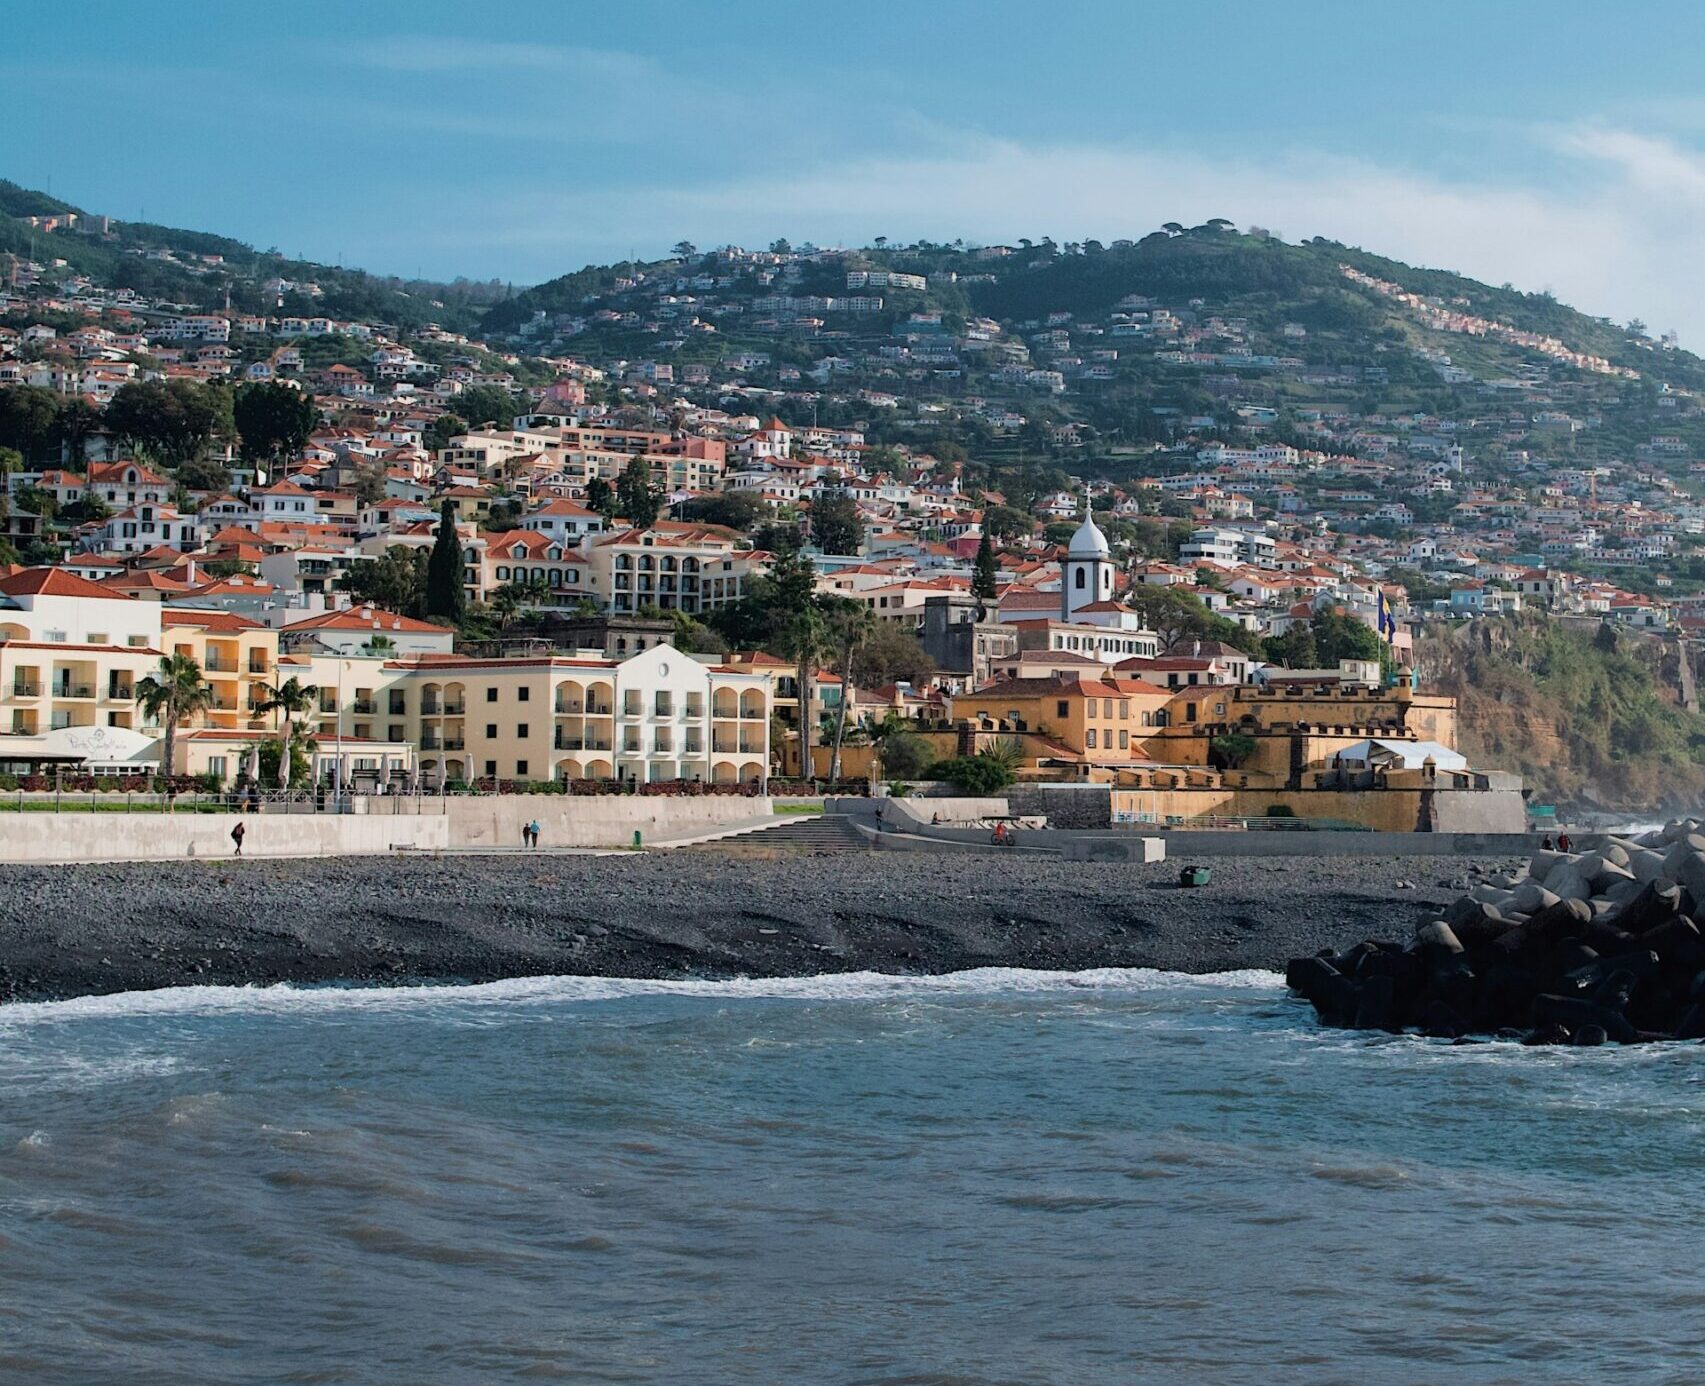 View of the coast of Funchal, Portugal from the ocean